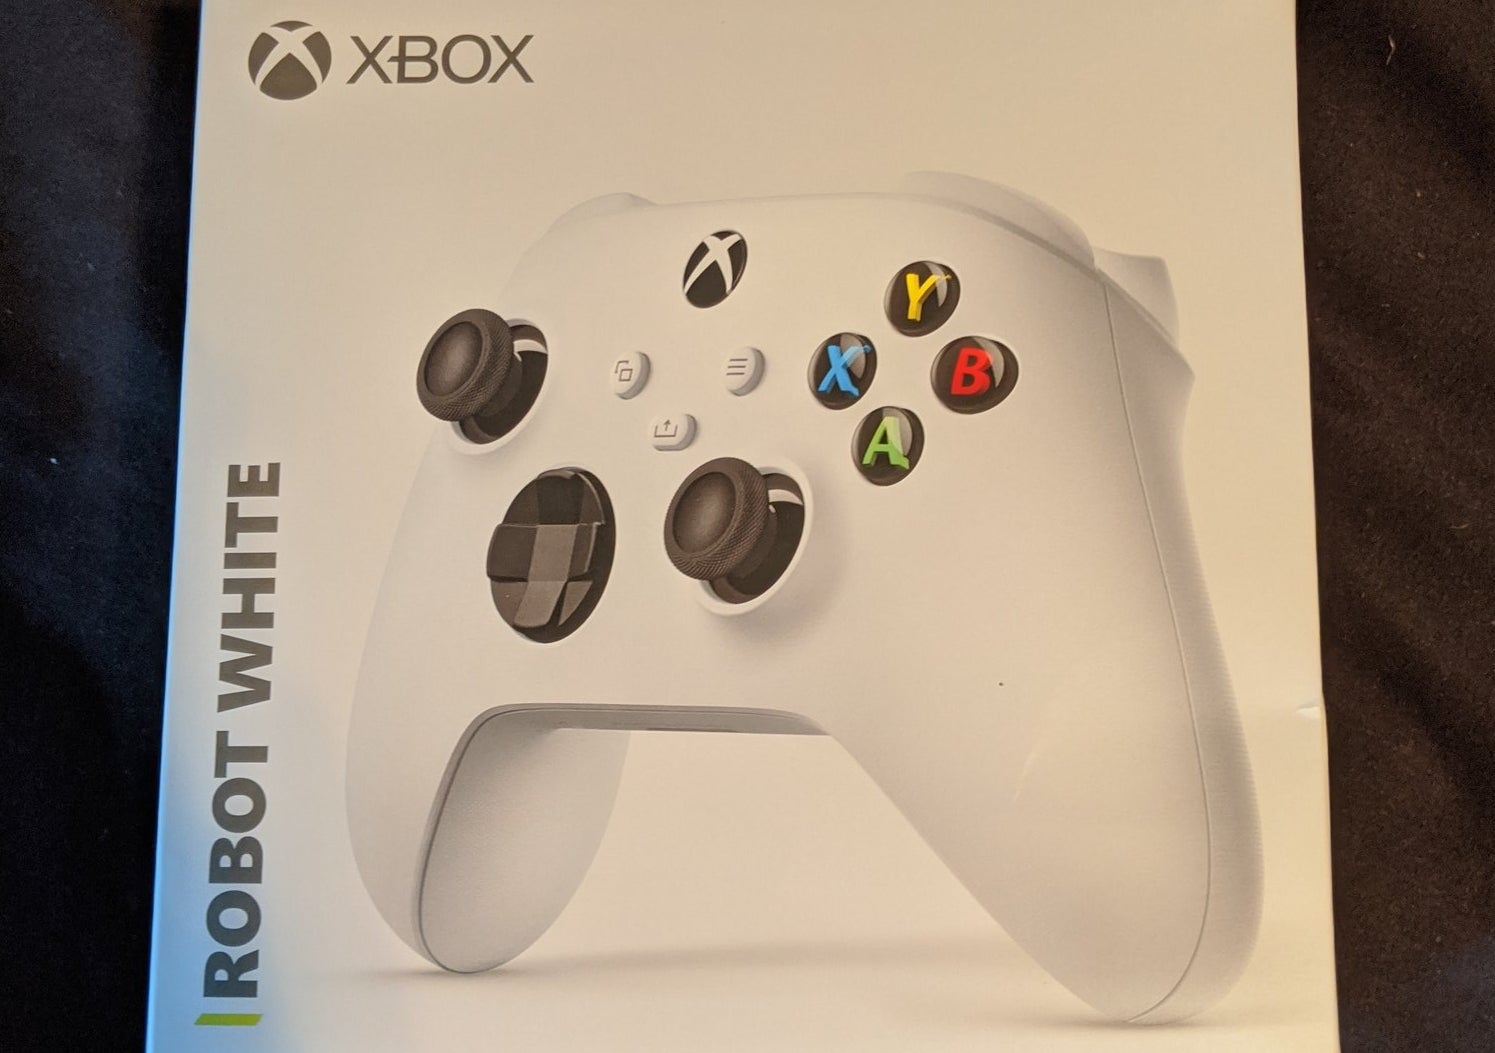 Image for Xbox Series S confirmed via leaked controller packaging